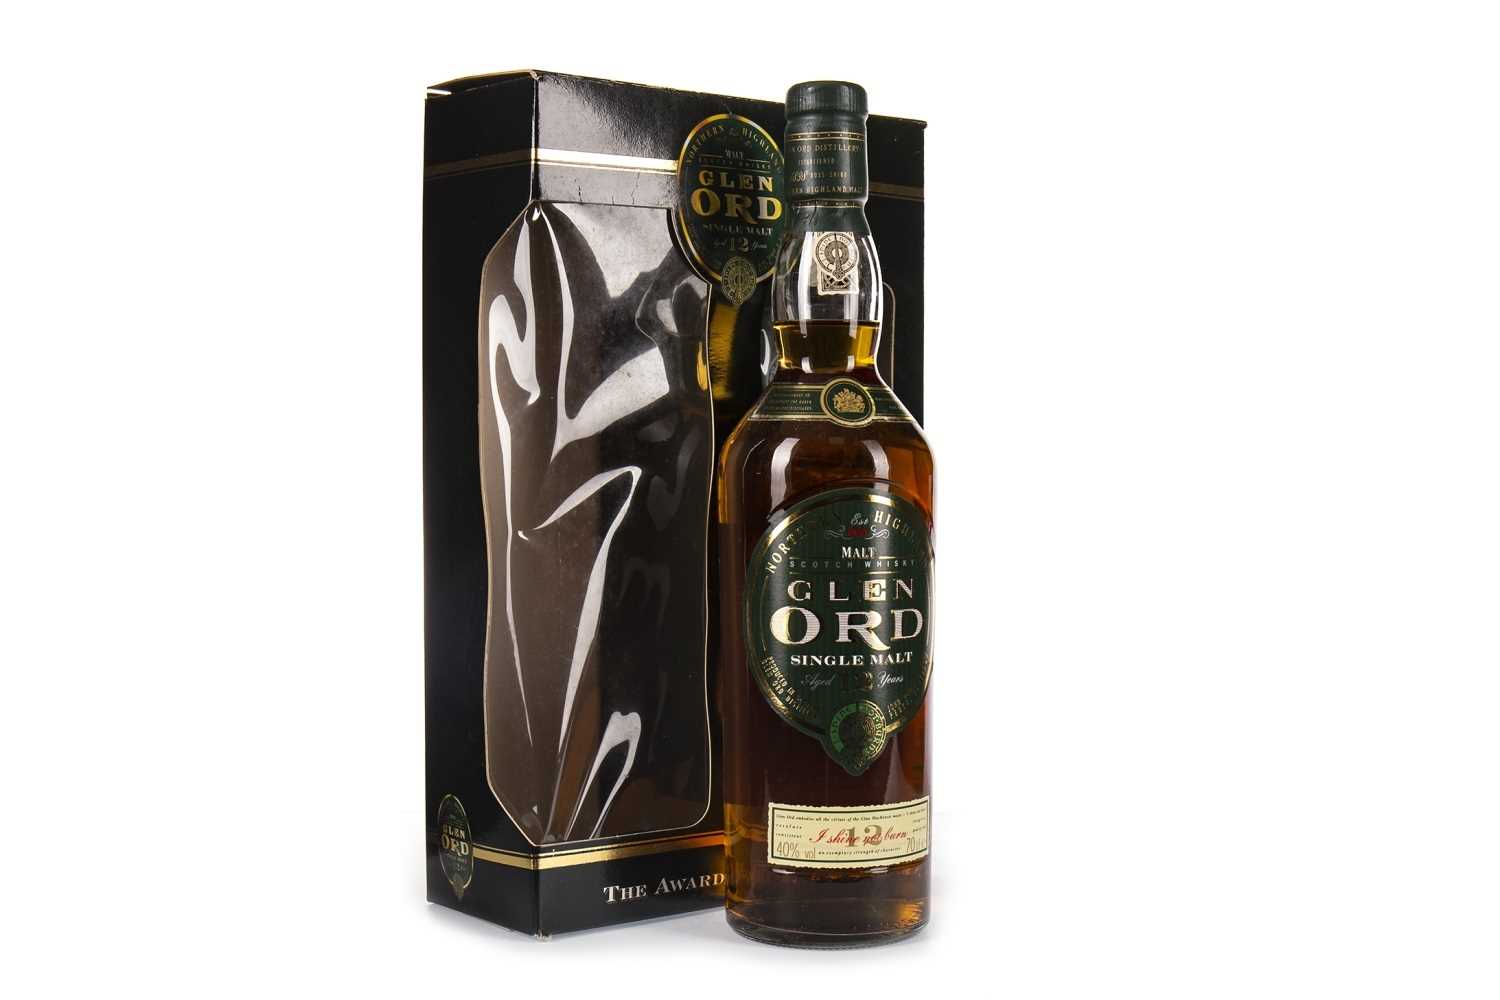 Lot 337 - GLEN ORD 12 YEARS OLD GLASS PACK